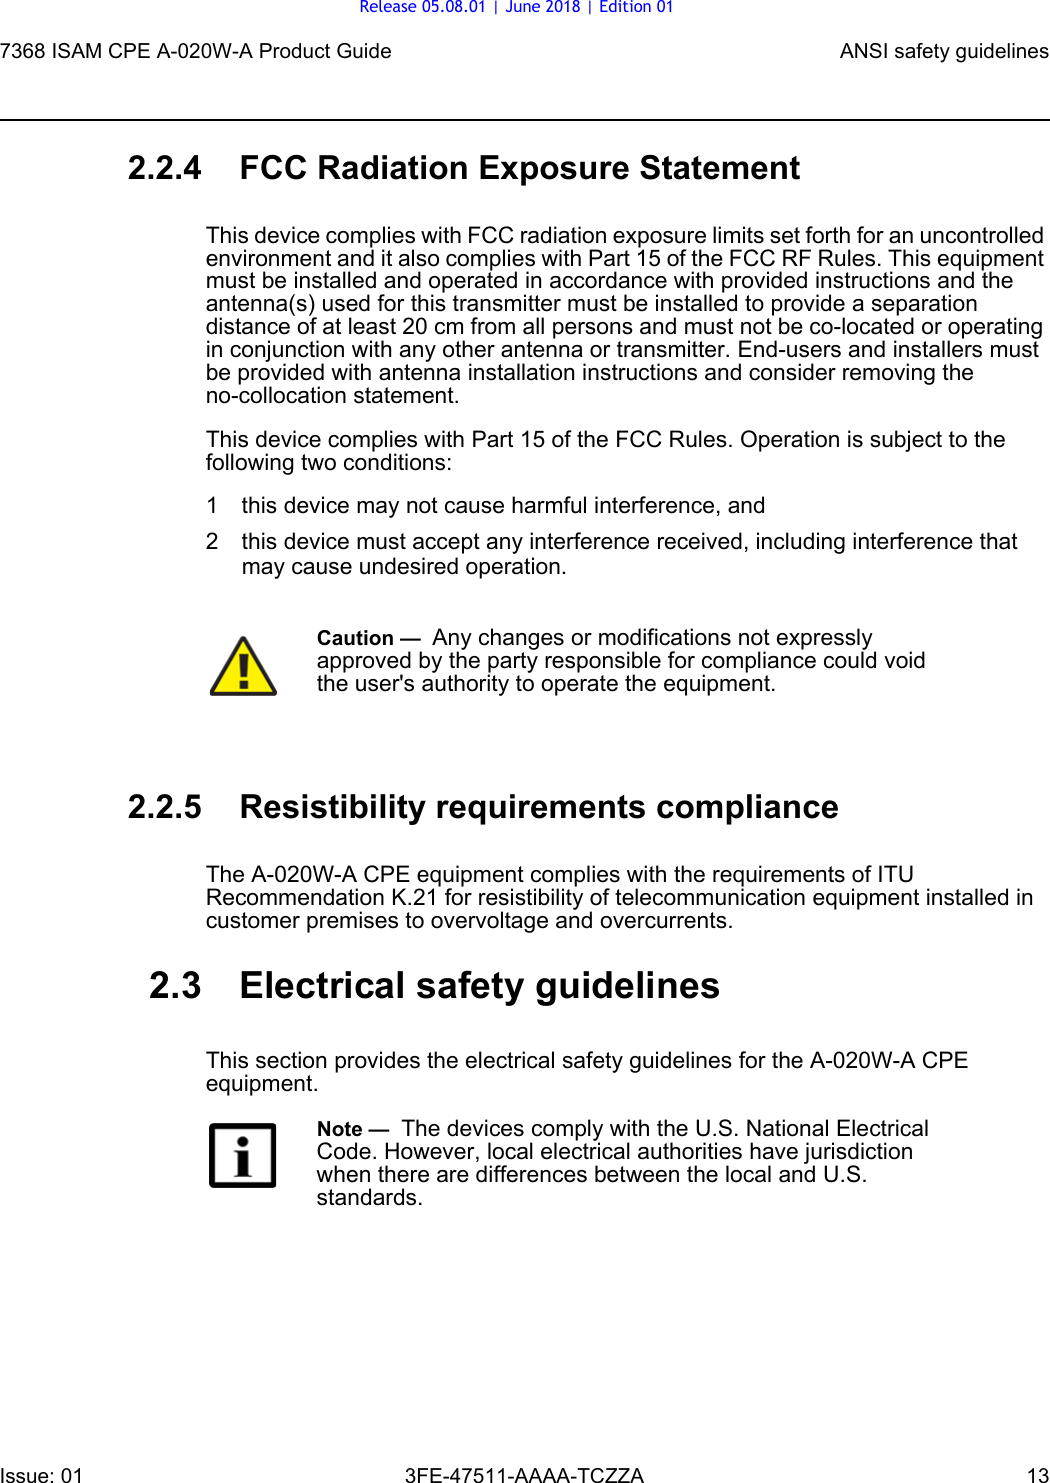 7368 ISAM CPE A-020W-A Product Guide ANSI safety guidelinesIssue: 01 3FE-47511-AAAA-TCZZA 13 2.2.4 FCC Radiation Exposure StatementThis device complies with FCC radiation exposure limits set forth for an uncontrolled environment and it also complies with Part 15 of the FCC RF Rules. This equipment must be installed and operated in accordance with provided instructions and the antenna(s) used for this transmitter must be installed to provide a separation distance of at least 20 cm from all persons and must not be co-located or operating in conjunction with any other antenna or transmitter. End-users and installers must be provided with antenna installation instructions and consider removing the no-collocation statement. This device complies with Part 15 of the FCC Rules. Operation is subject to the following two conditions: 1 this device may not cause harmful interference, and 2 this device must accept any interference received, including interference that may cause undesired operation. 2.2.5 Resistibility requirements complianceThe A-020W-A CPE equipment complies with the requirements of ITU Recommendation K.21 for resistibility of telecommunication equipment installed in customer premises to overvoltage and overcurrents.2.3 Electrical safety guidelinesThis section provides the electrical safety guidelines for the A-020W-A CPE equipment.Caution —  Any changes or modifications not expressly approved by the party responsible for compliance could void the user&apos;s authority to operate the equipment. Note —  The devices comply with the U.S. National Electrical Code. However, local electrical authorities have jurisdiction when there are differences between the local and U.S. standards.Release 05.08.01 | June 2018 | Edition 01